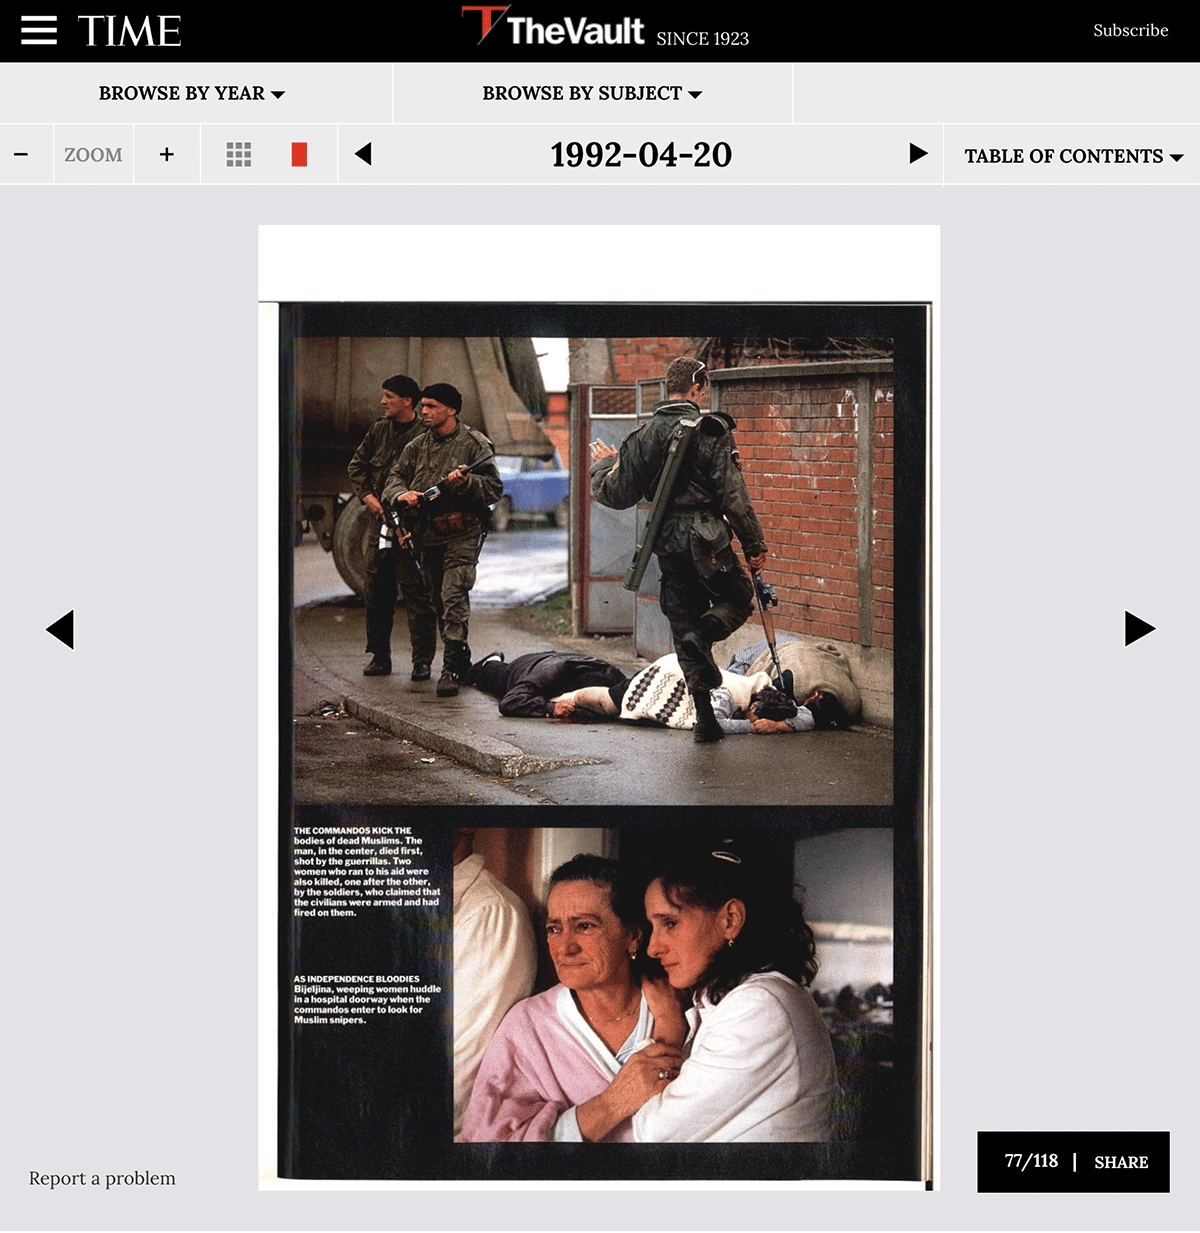 Haviv's photo as it was first published in <em><a href='https://time.com/vault/issue/1992-04-20/page/77/' target='_blank'>Time Magazine</a></em> in 1992.